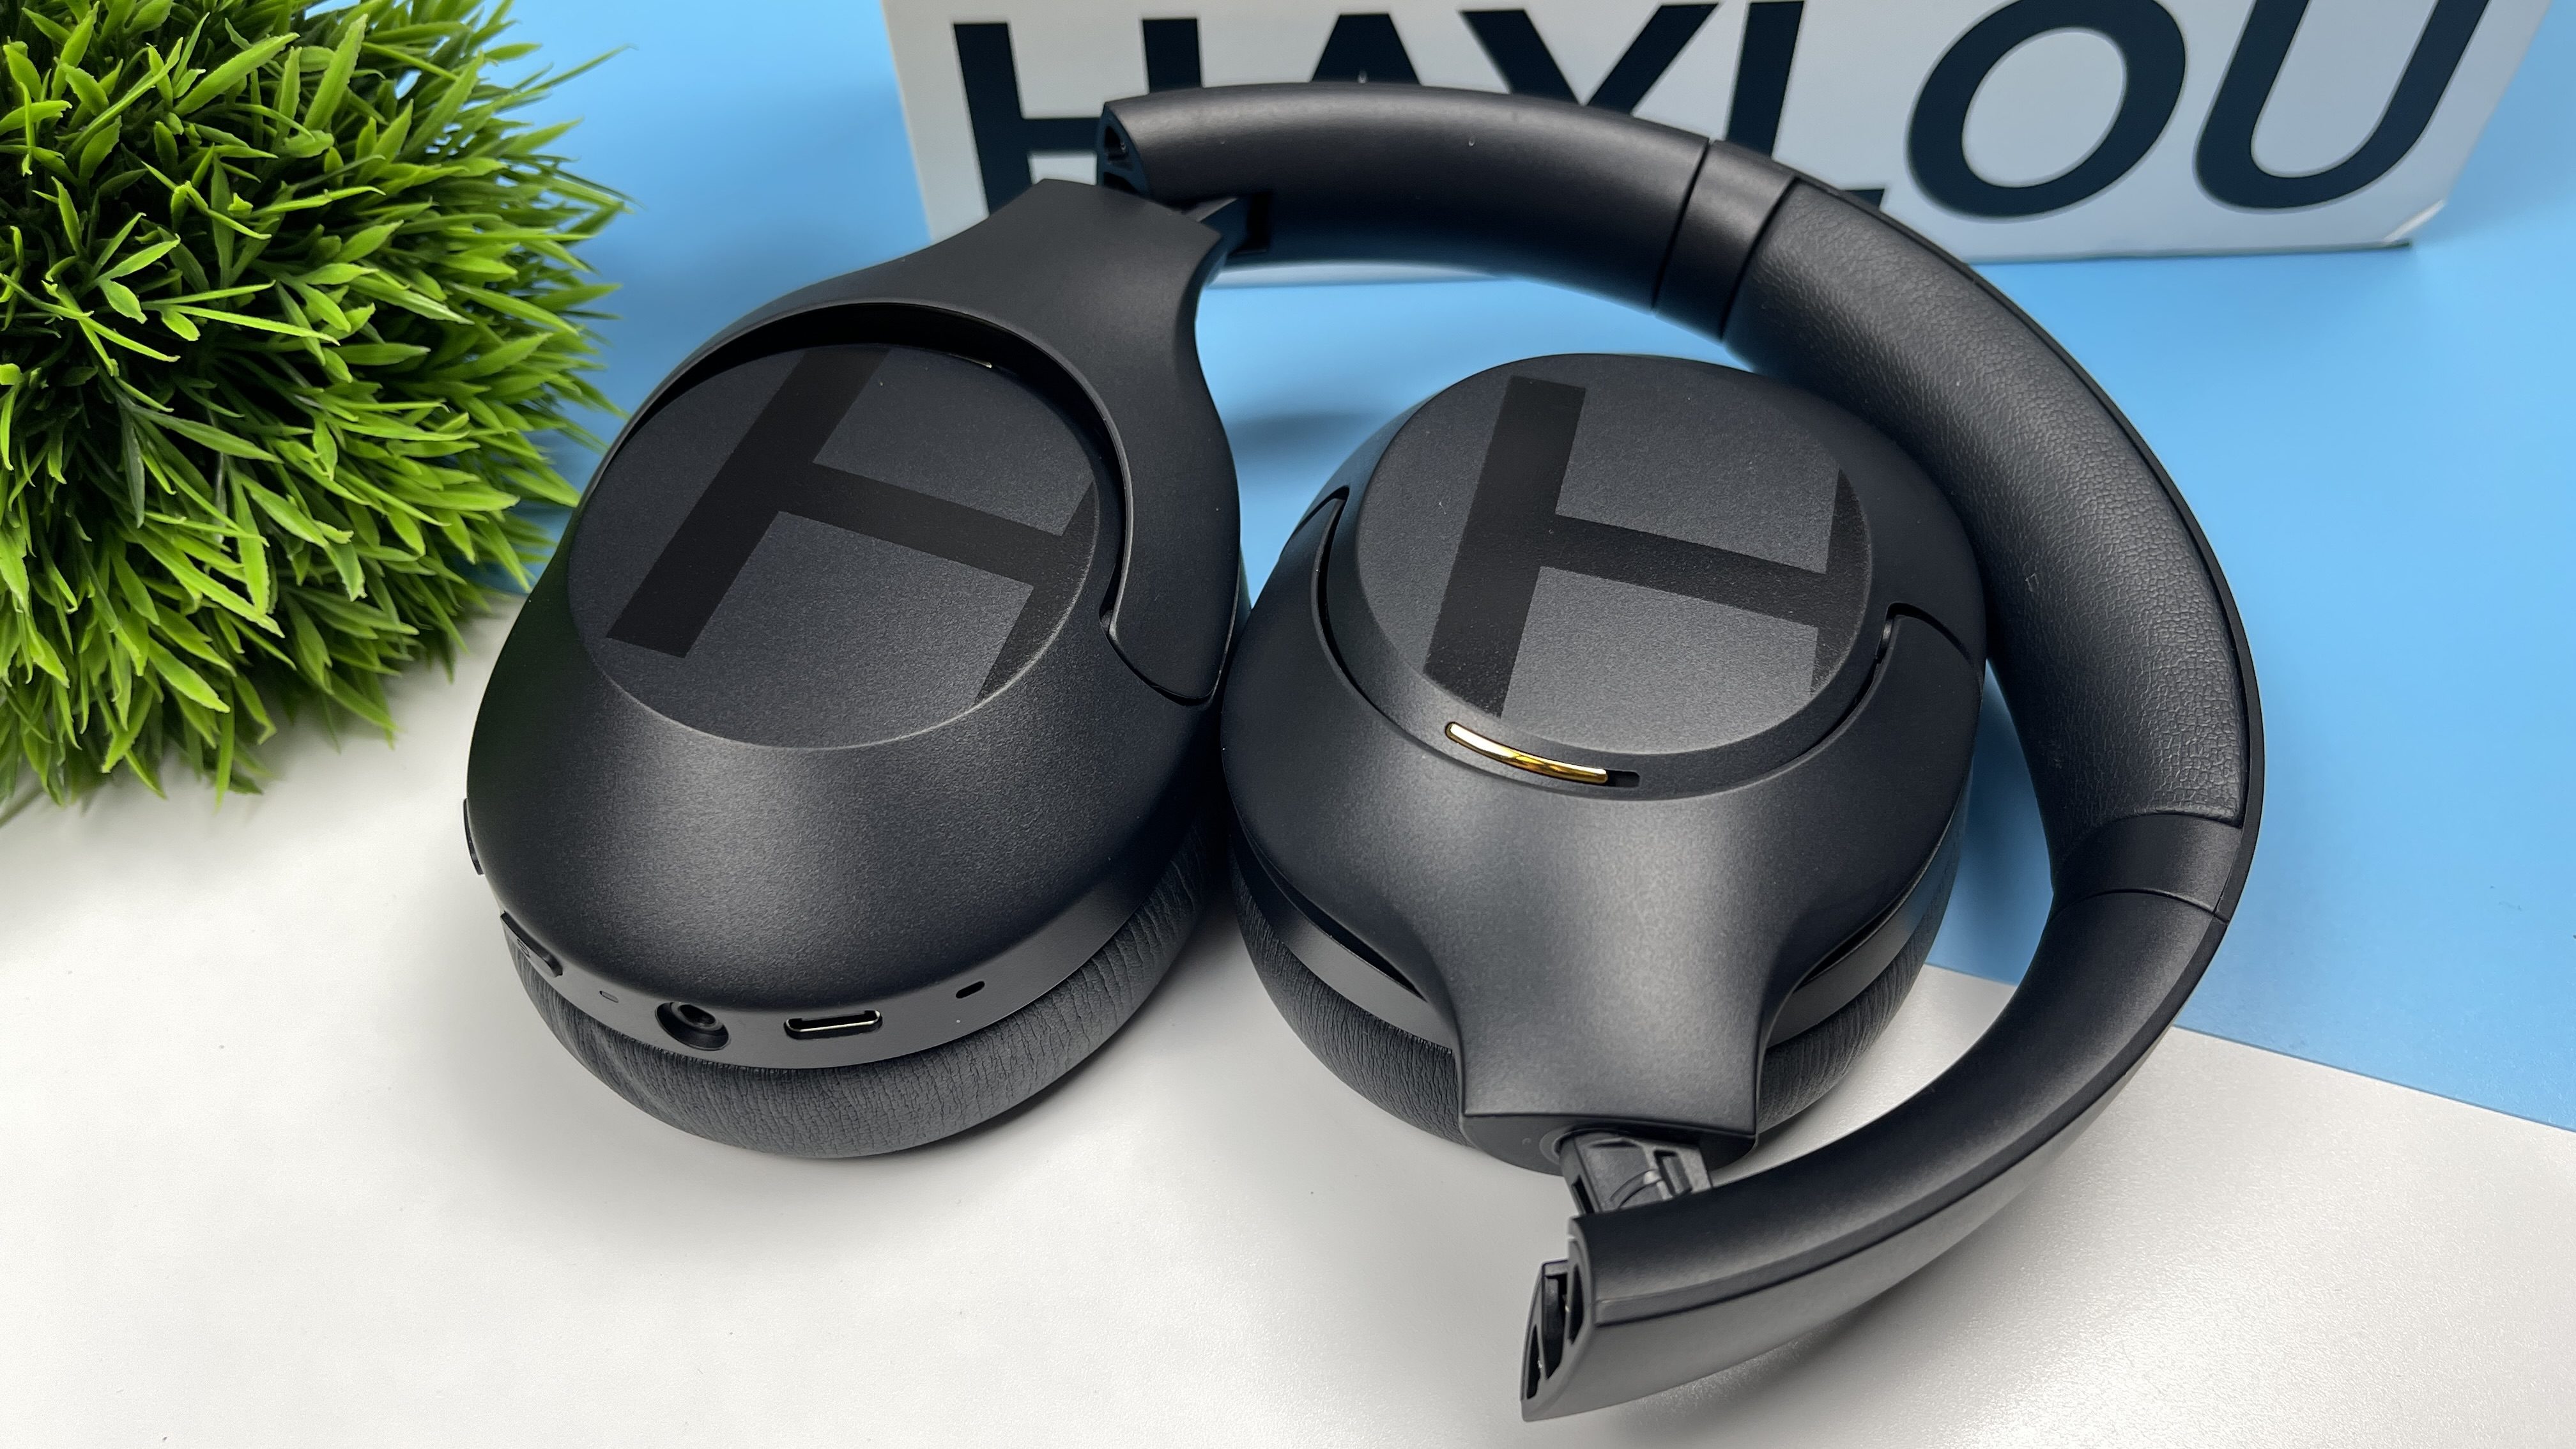 Haylou S35 Wireless Headphones Review - Affordable Option with Impressive Features